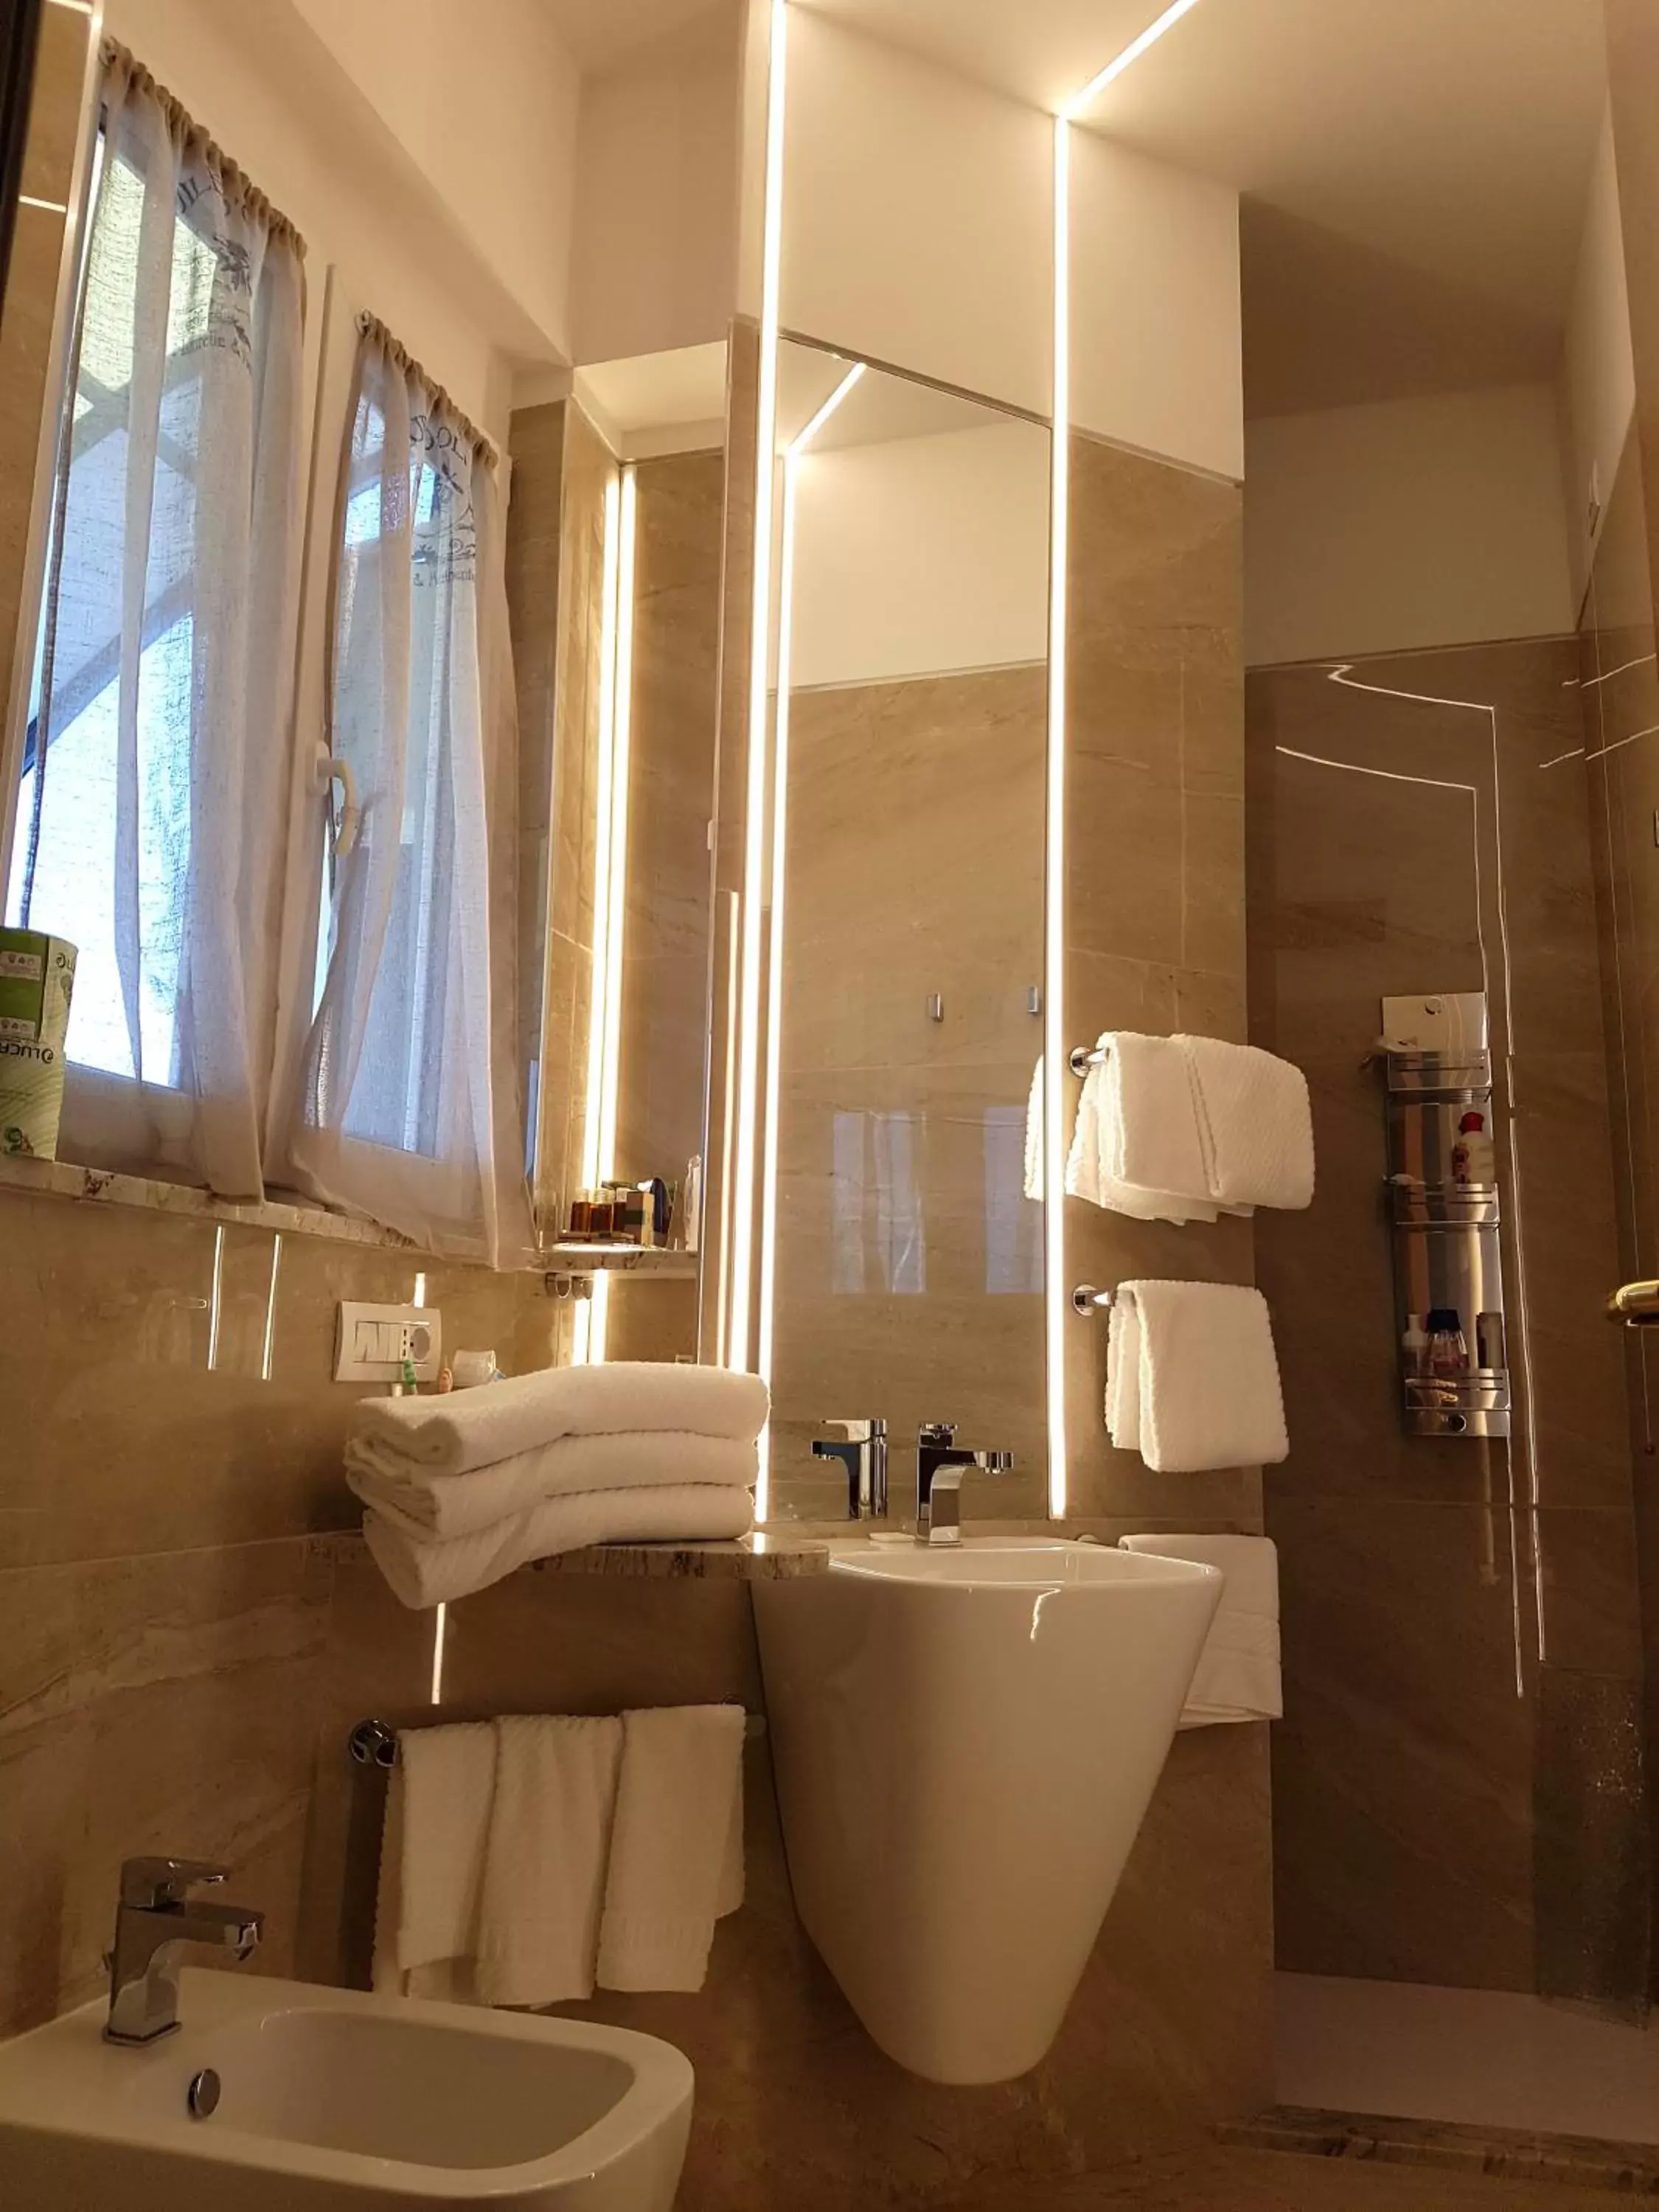 Two Connecting Rooms with Shared Bathroom in Abacus Hotel